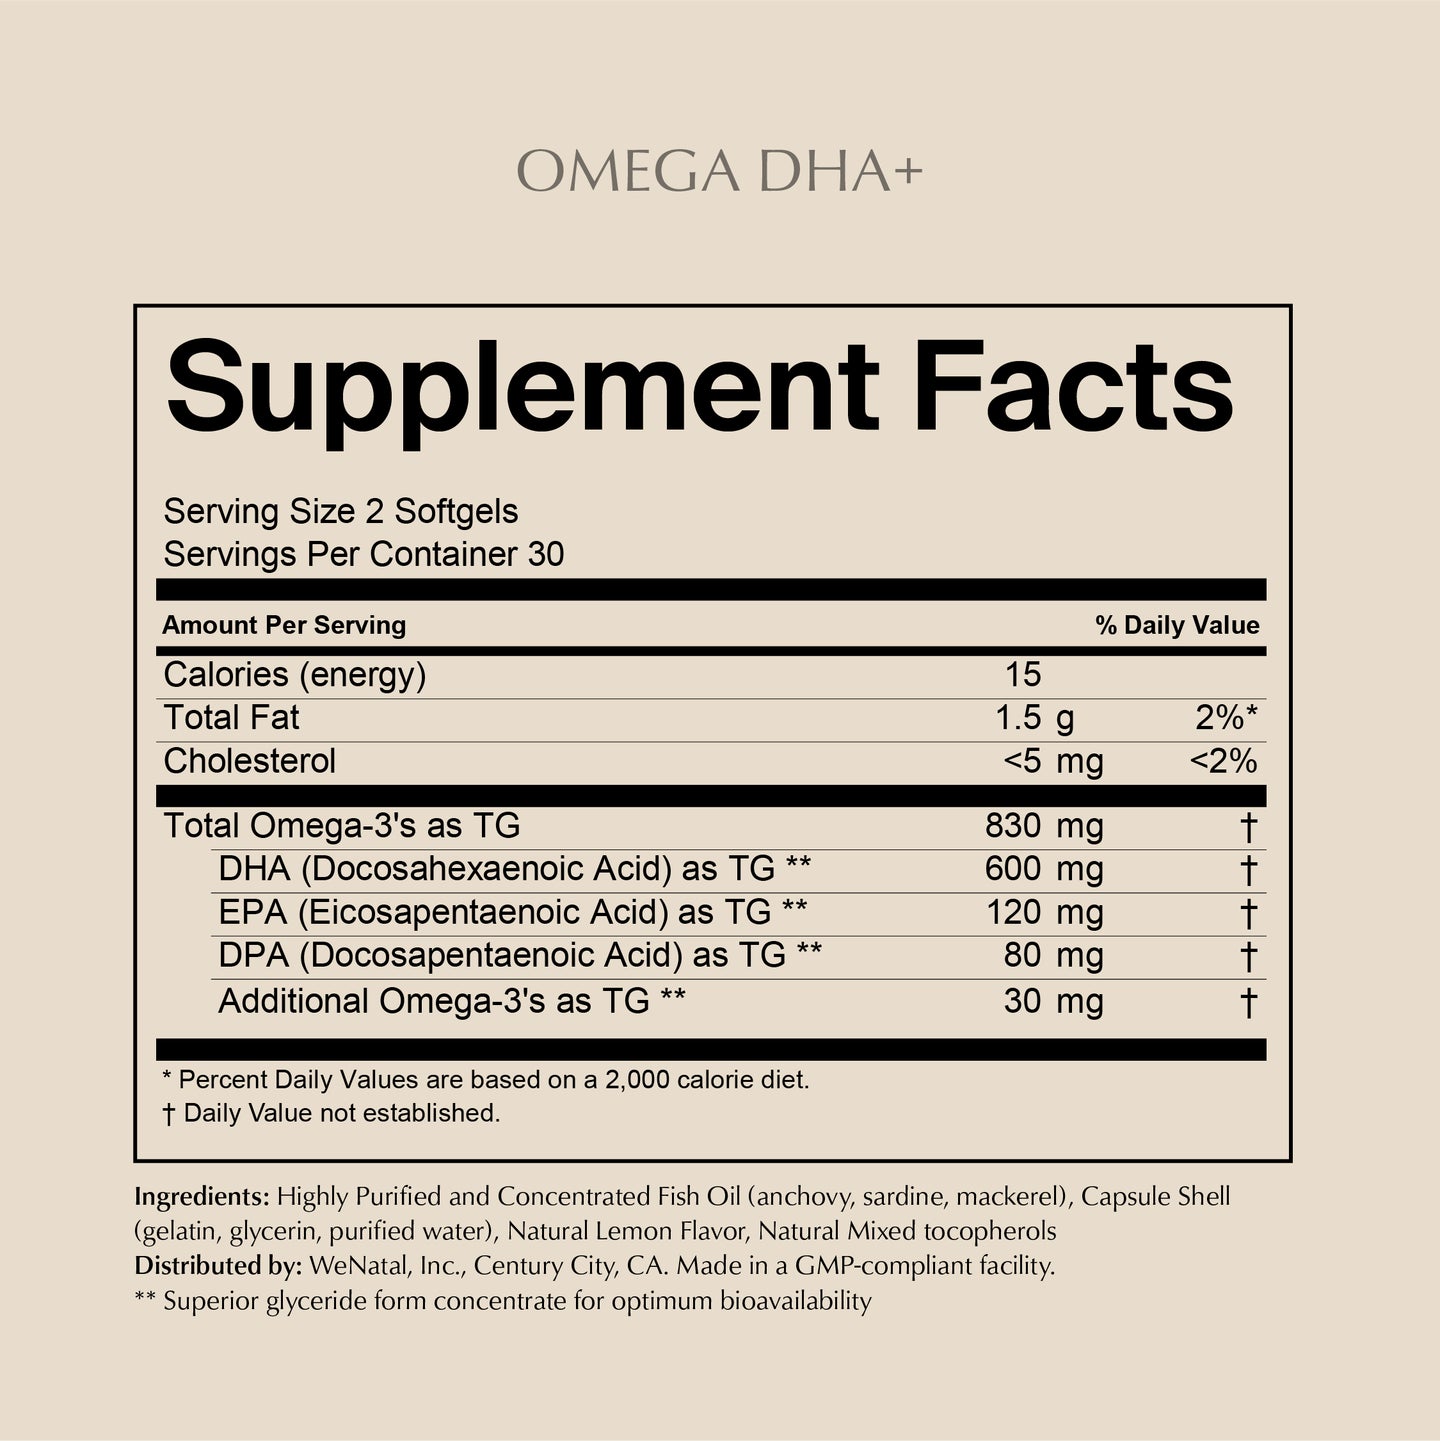 Omega DHA+ fish oil nutrition label 